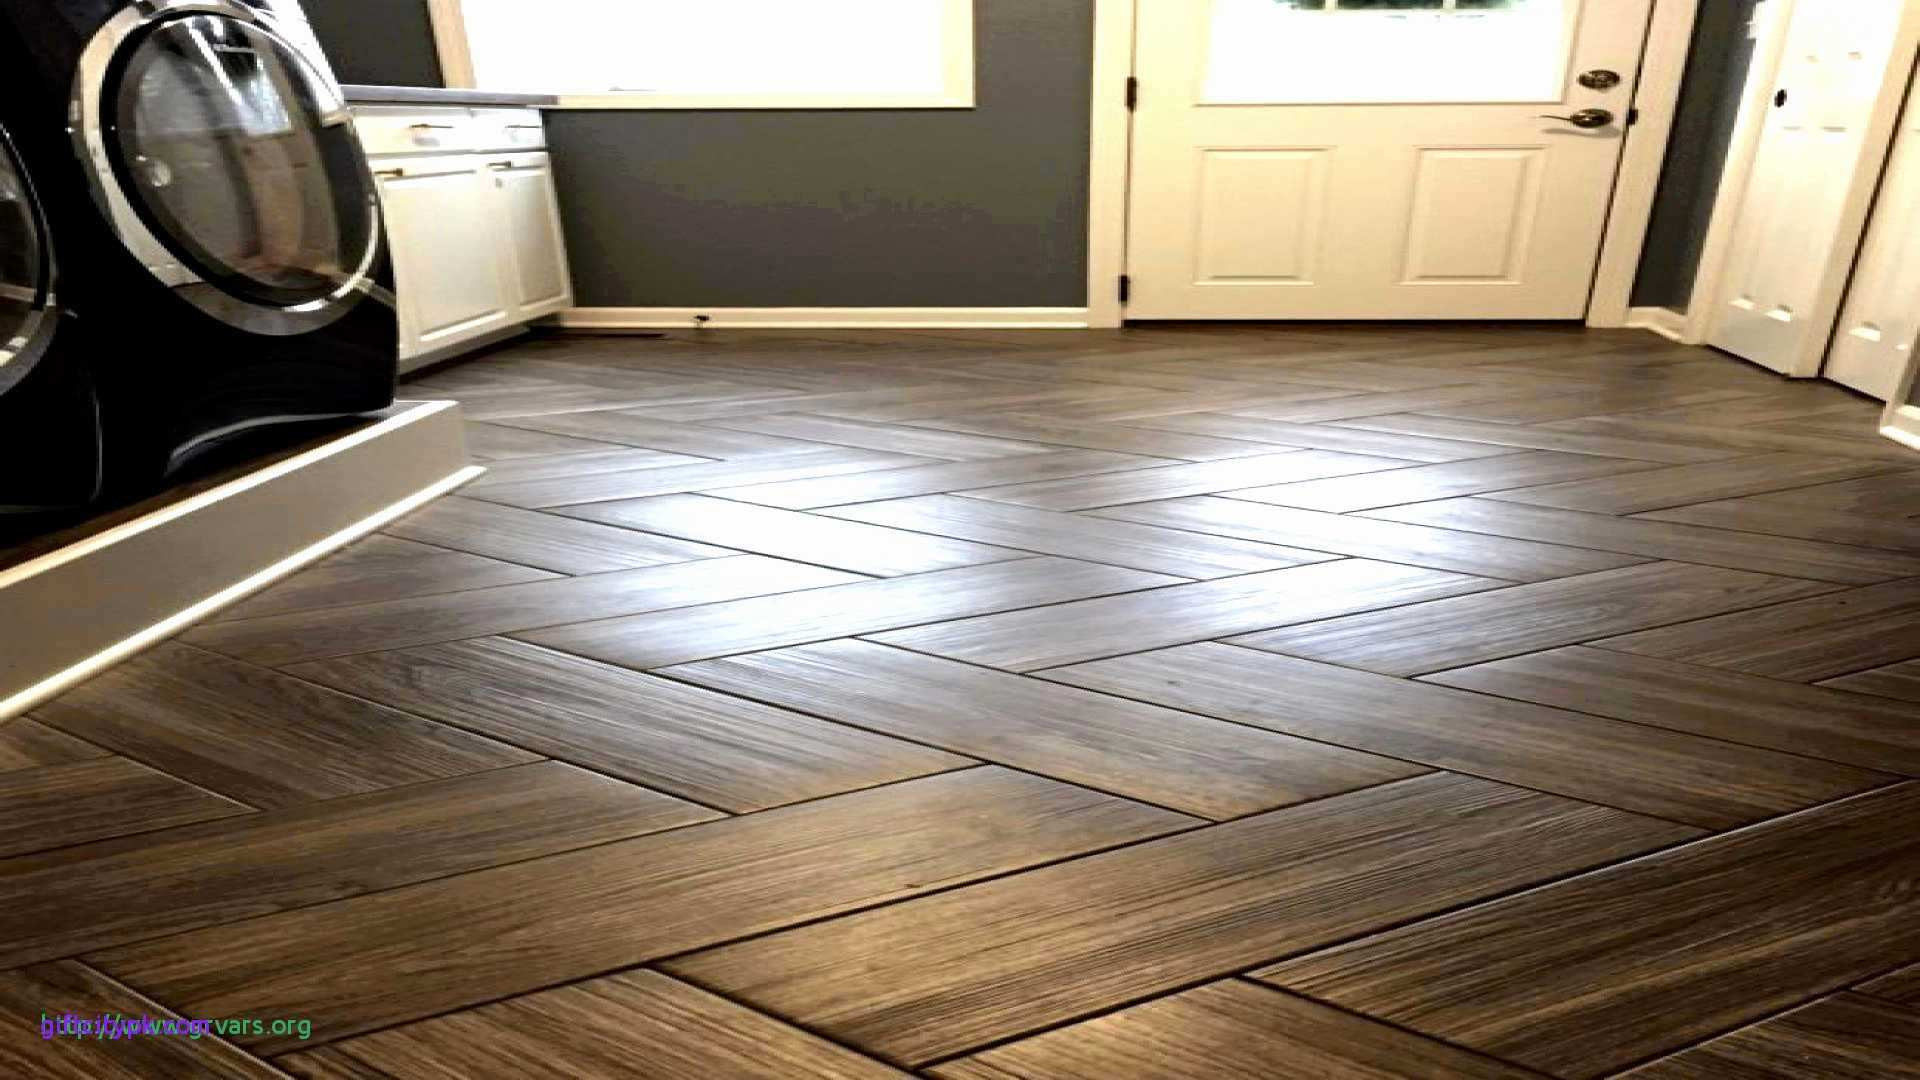 staining hardwood floors how to of chemical free flooring giftcitypk giftcitypk throughout chemical free flooring